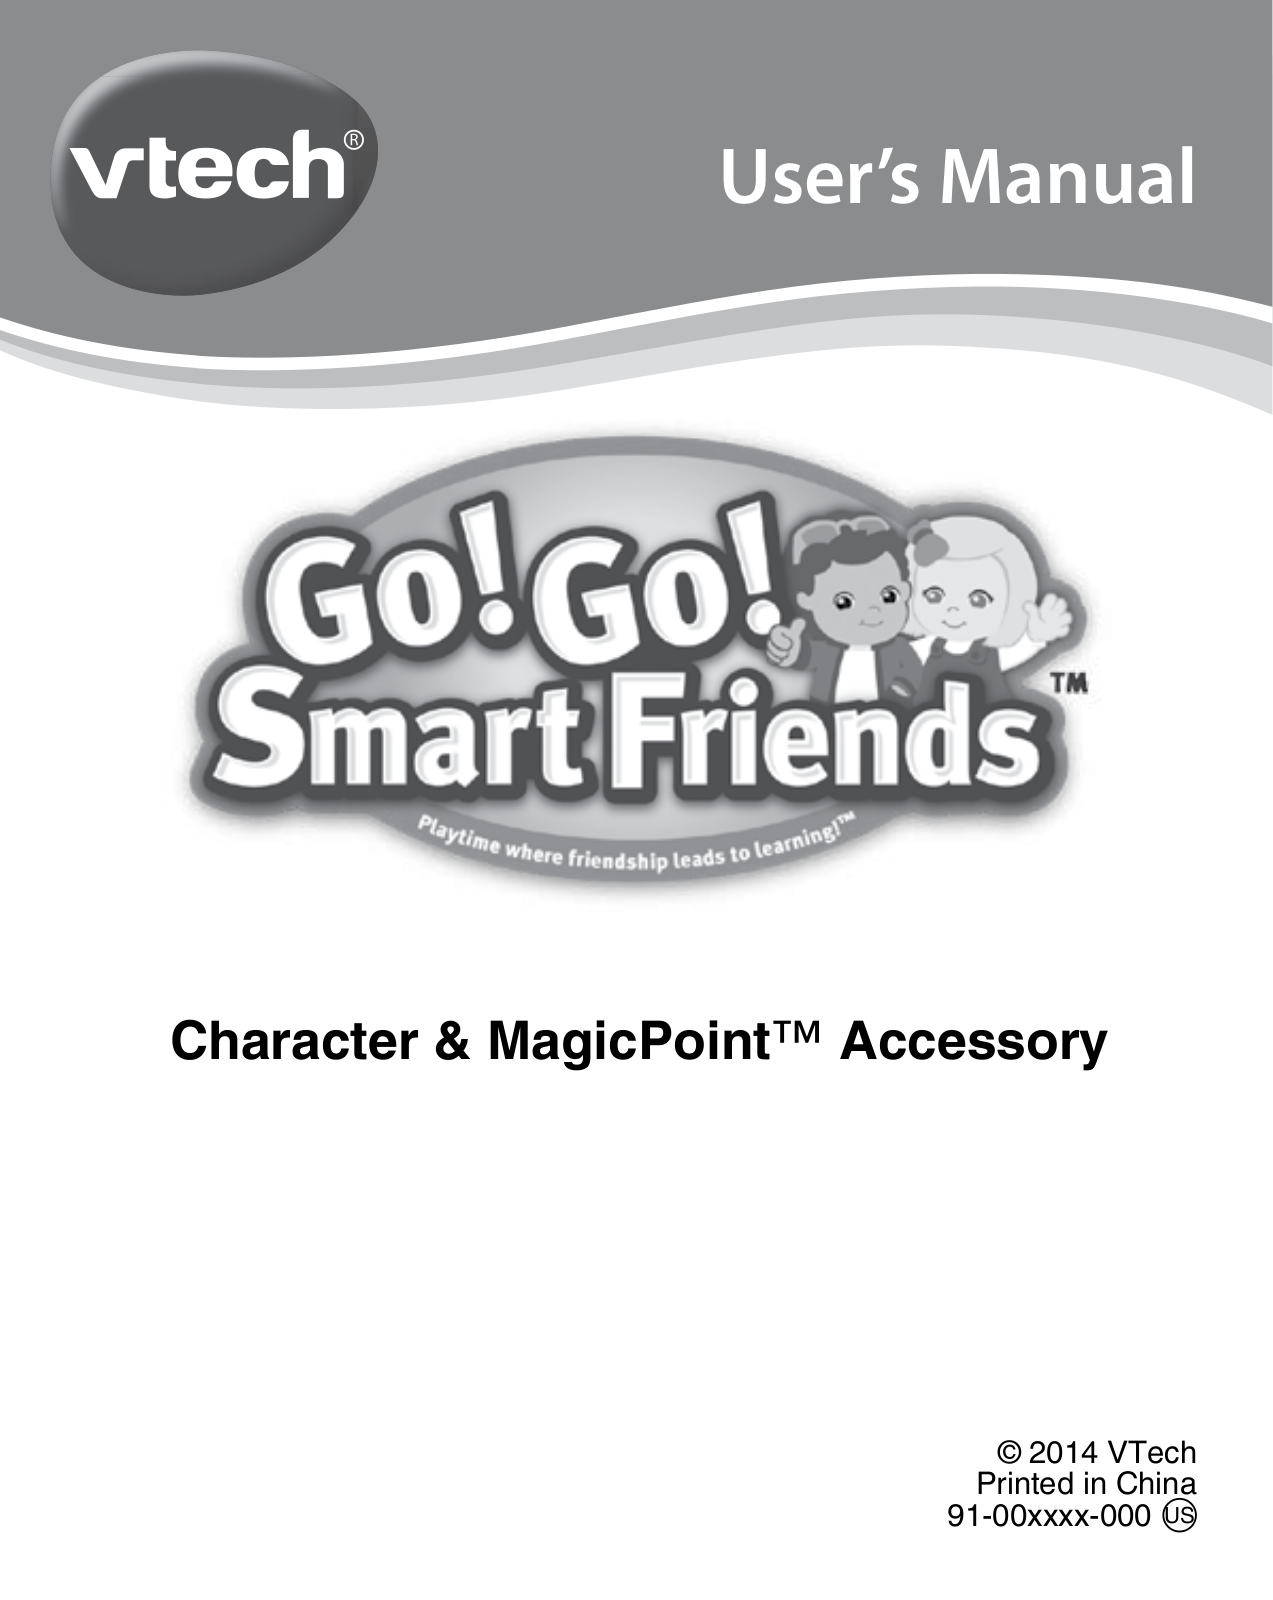 VTech Go! Go! Smart Friends - Dylan and his Skateboar, Go! Go! Smart Friends - Dawn and her Wagon, Go! Go! Smart Friends - Luca and his Bouncy Pla, Go! Go! Smart Friends - Maddie and her Rocking, Go! Go! Smart Friends - Jacob and his Scooter Owner's Manual